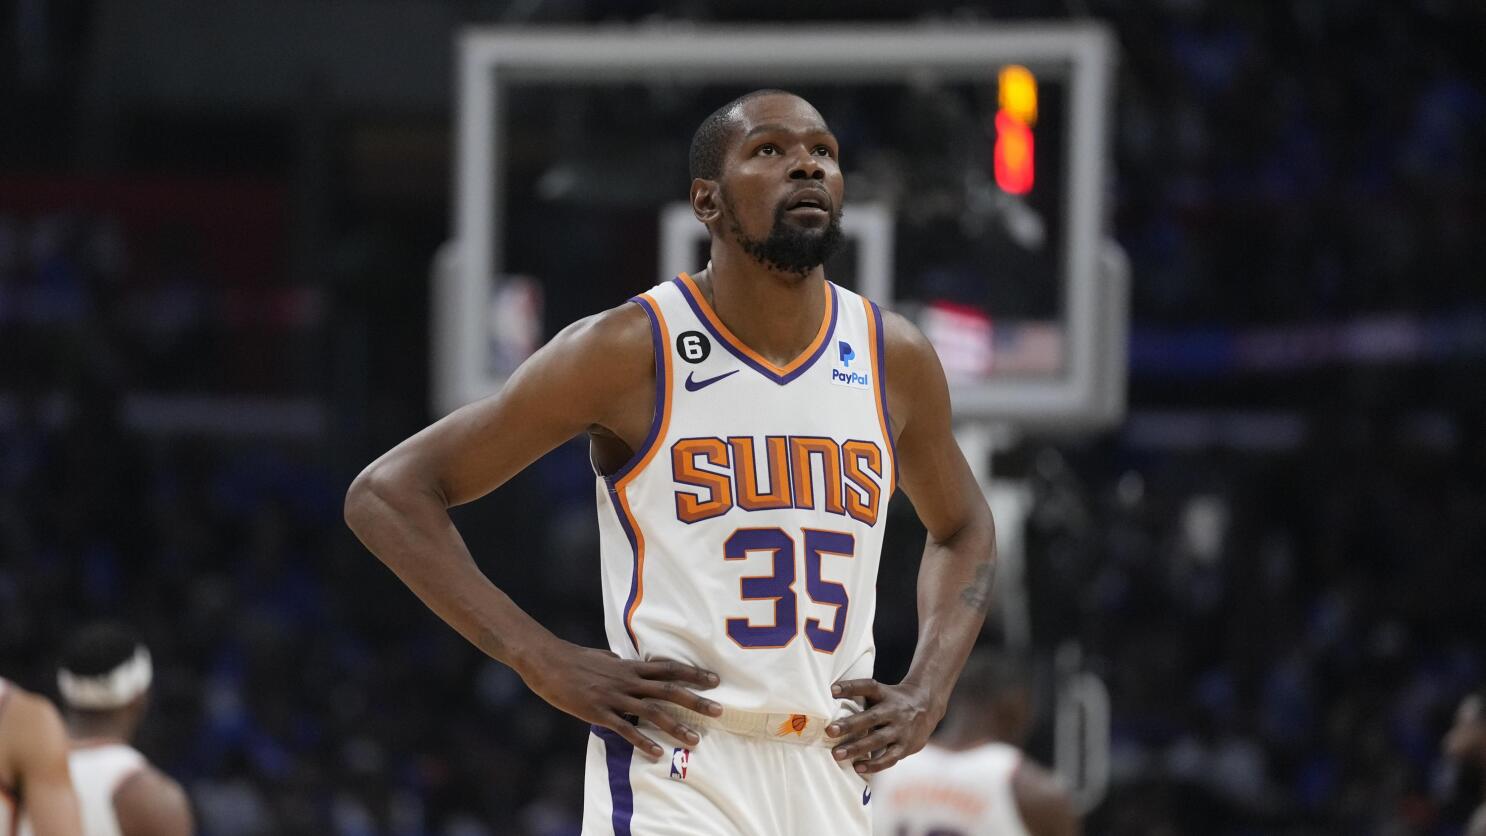 Kevin Durant Joins LeBron James and James Harden by Getting Into